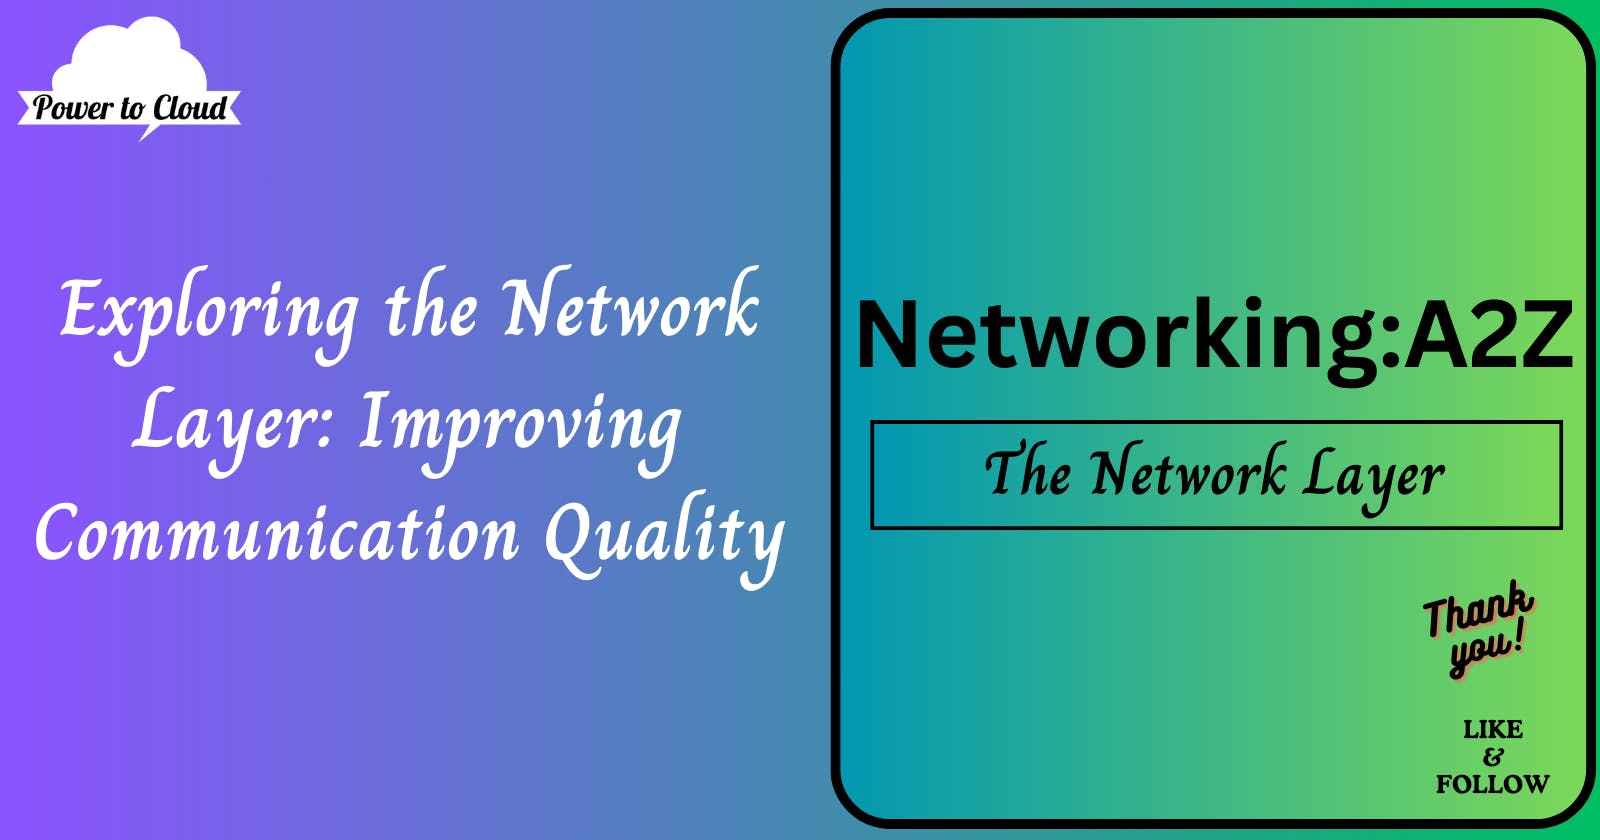 2.2 Exploring the Network Layer: Improving Communication Quality